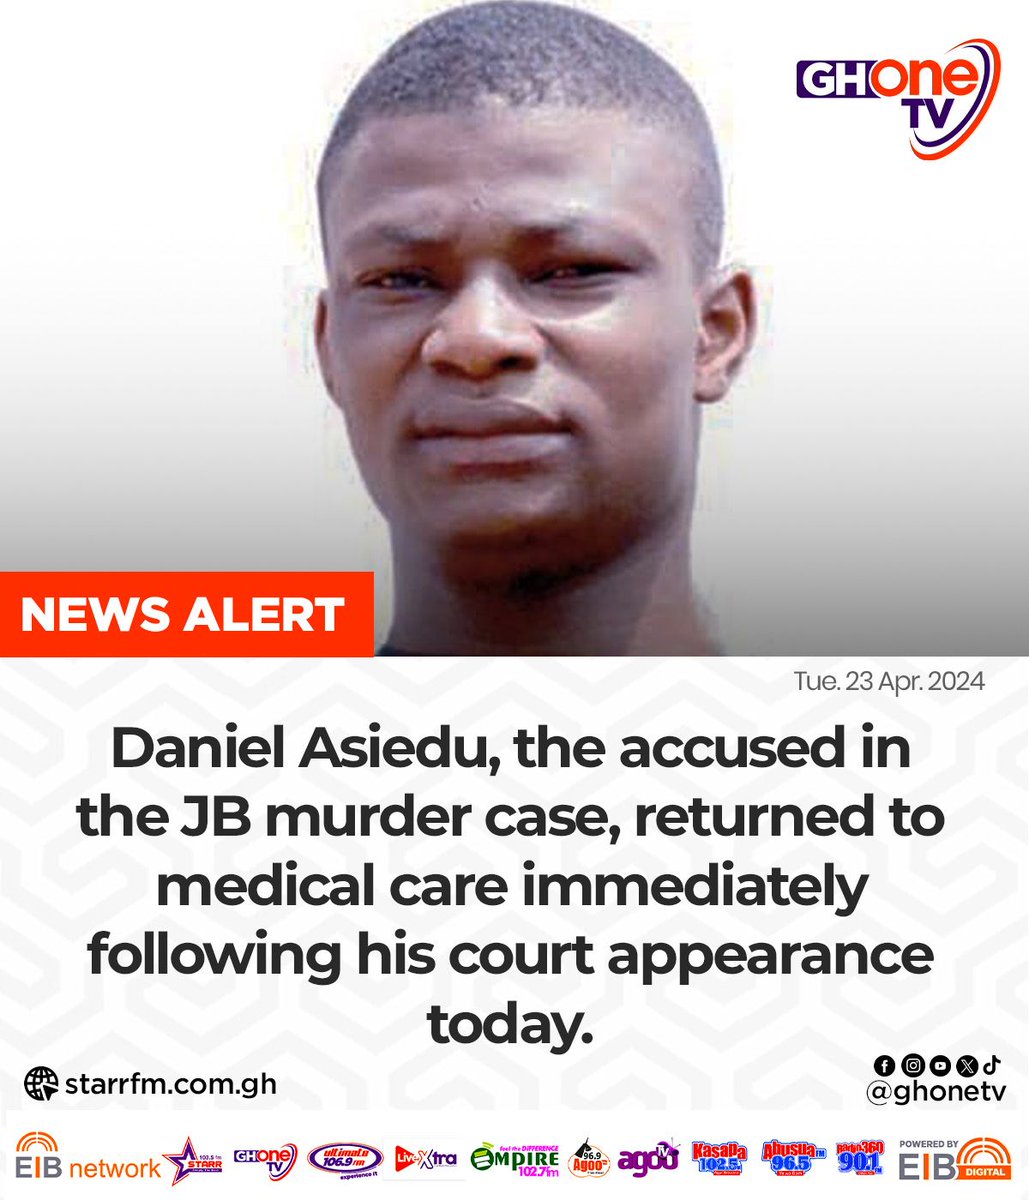 Daniel Asiedu has been sent back to see doctors shortly after appearing in Court... #GHOneNews #GHOneTV